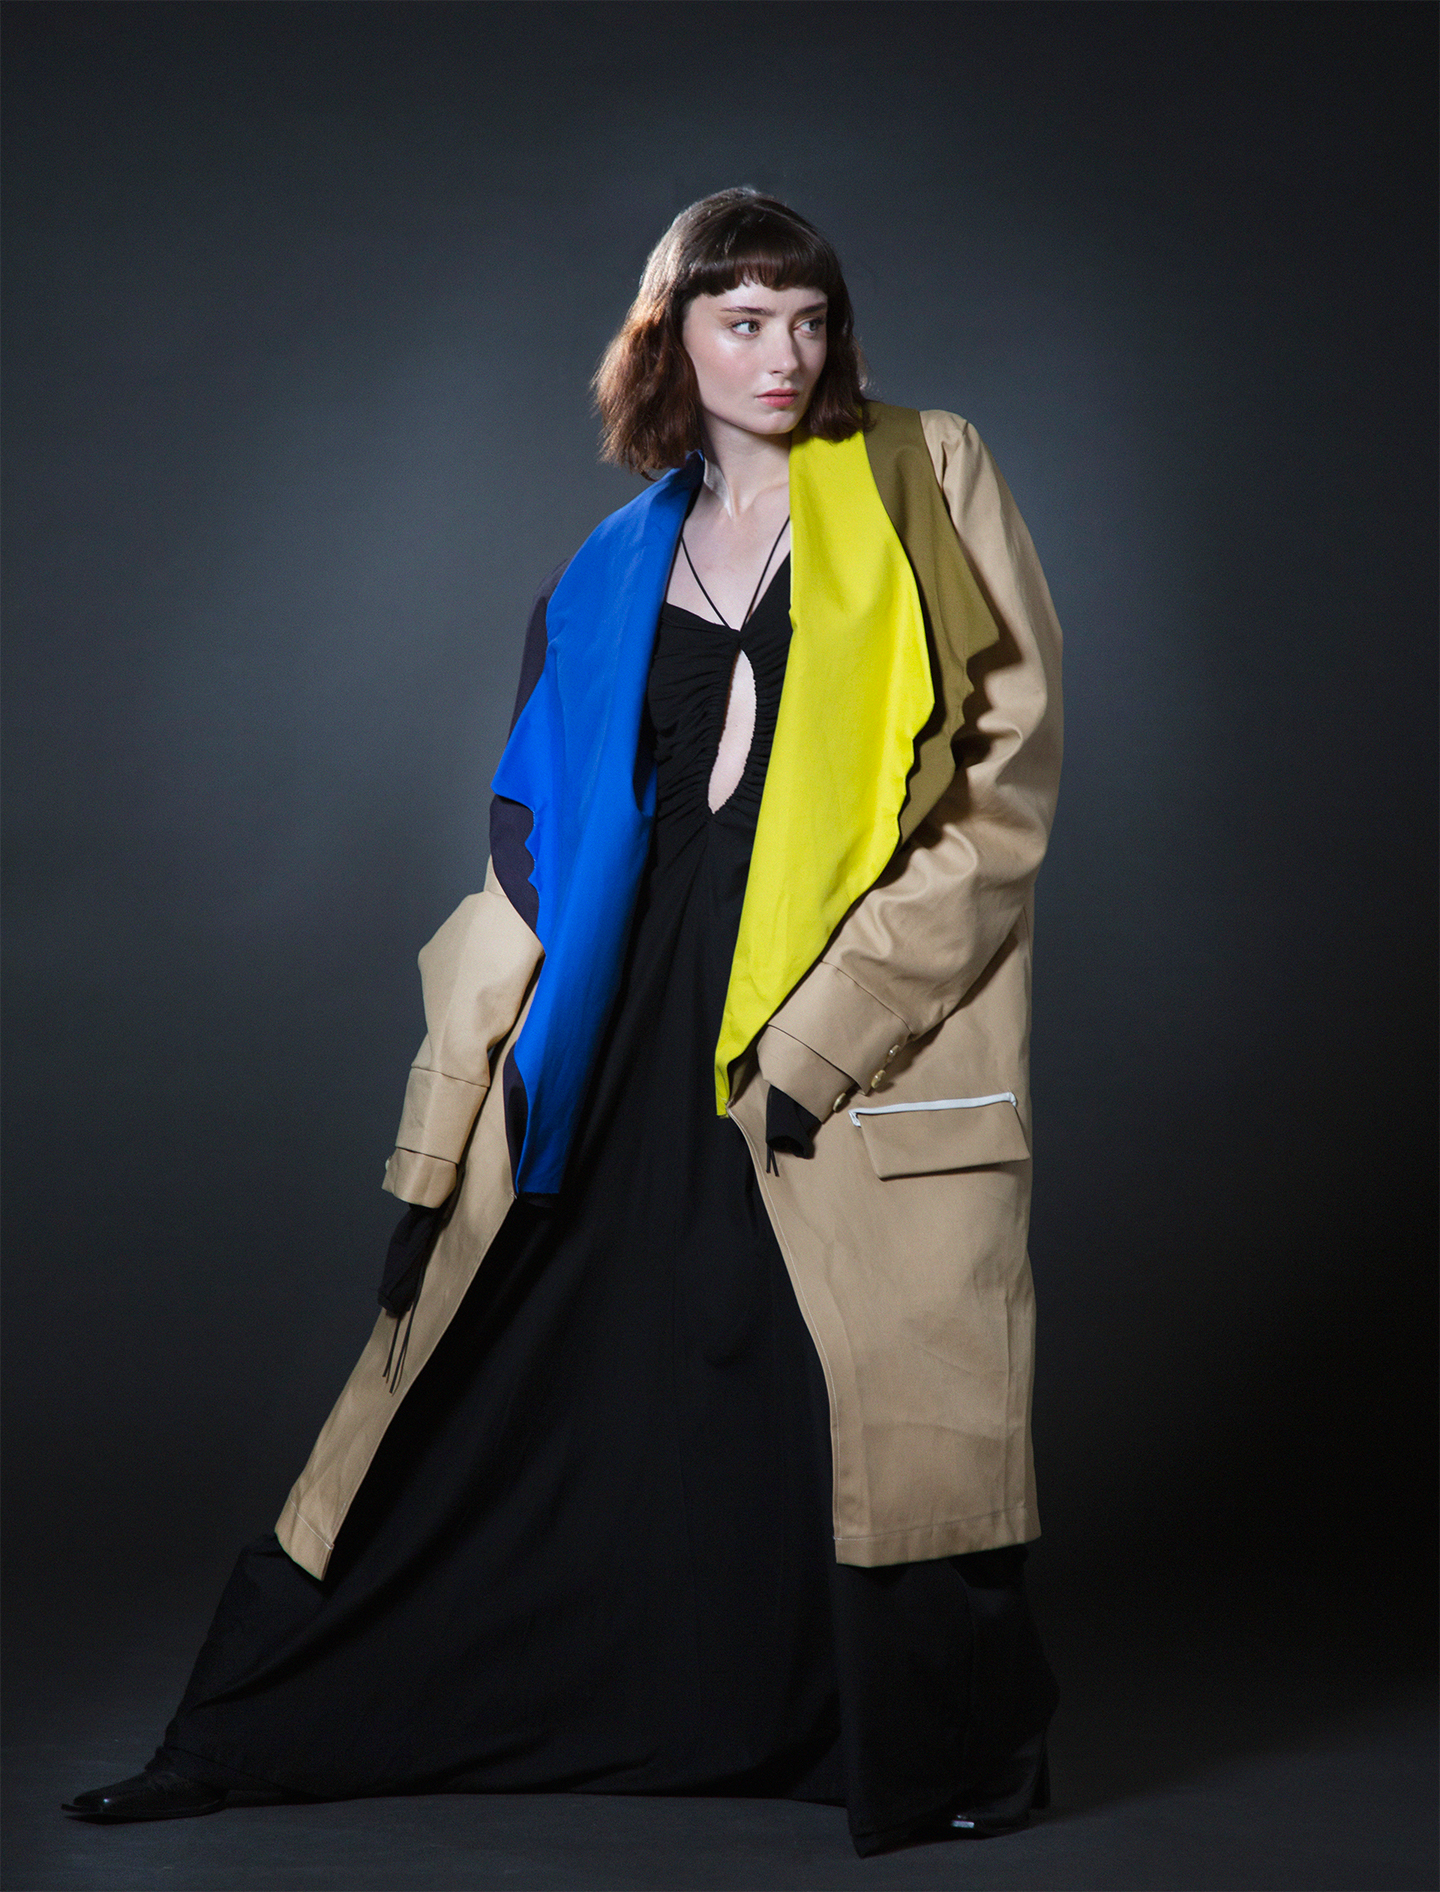 Photographer Nick Clements, tutor in Fashion Writing and Photographic Theory and Practice at Istituto Marangoni London, captured a model wearing the trench coat Lucrezia Grazioli created at Mackintosh